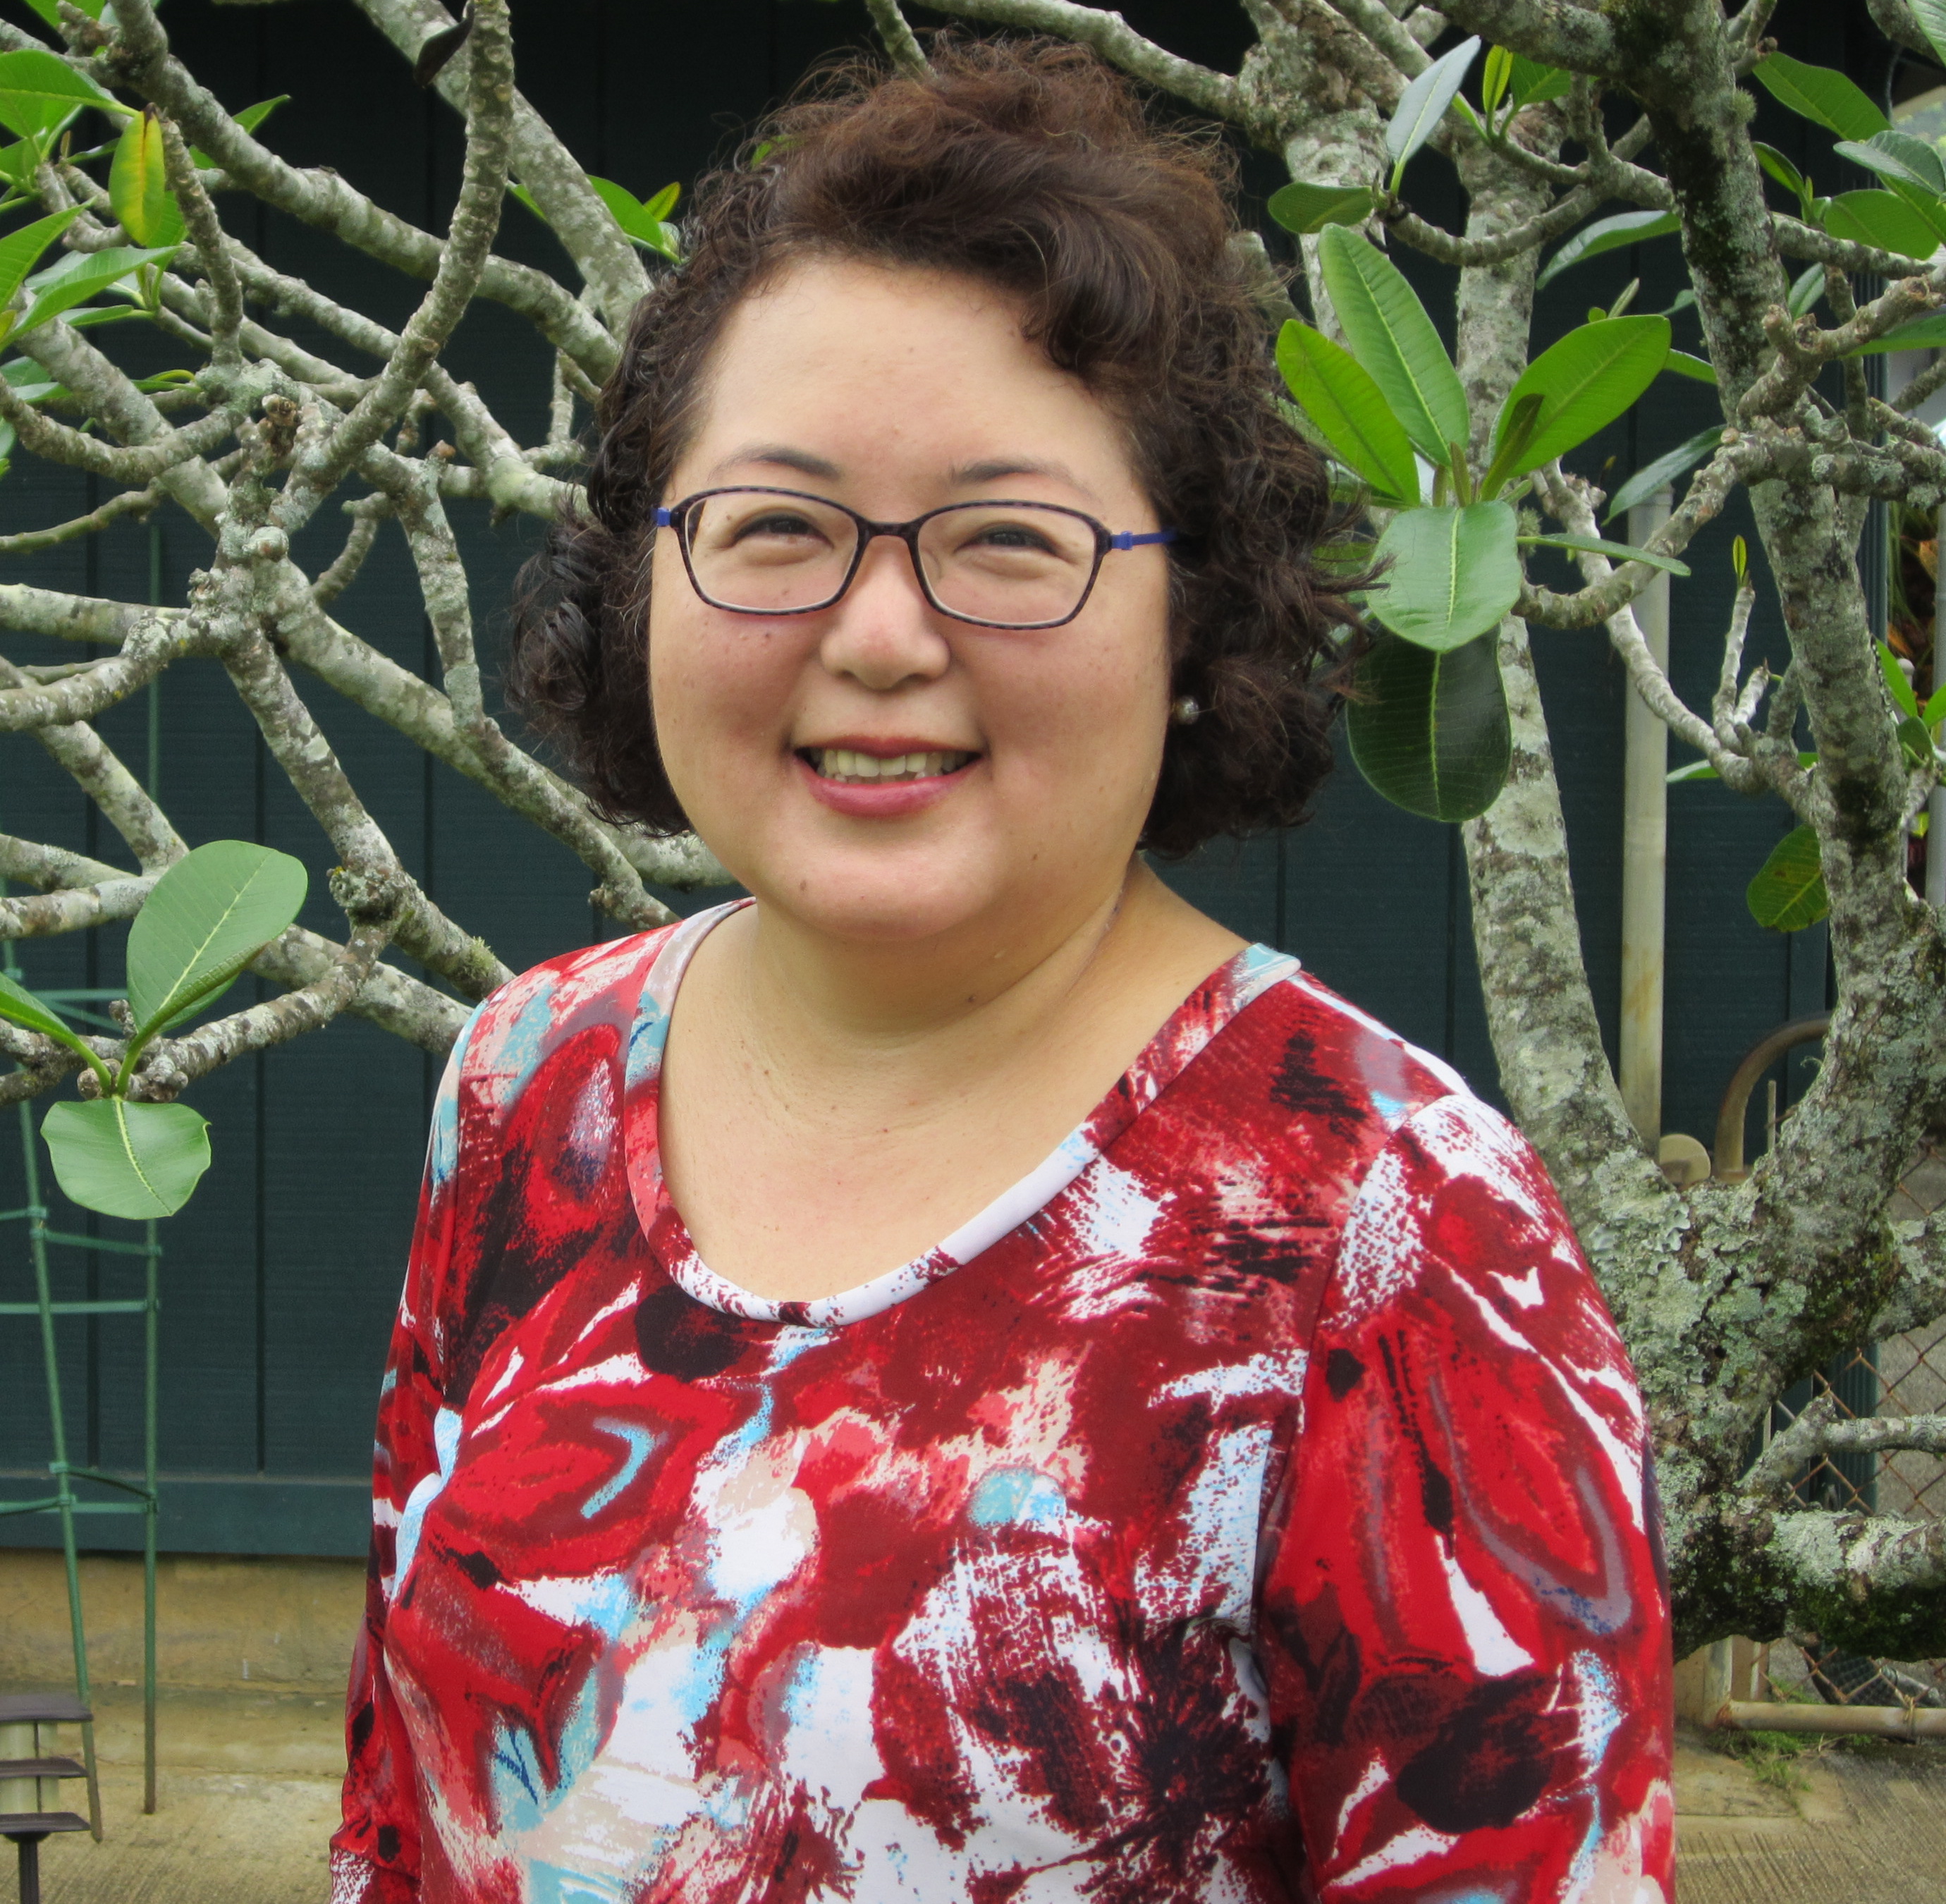 Dr. Satsuma wearing a red, blue, and white blouse and glasses with black and blue frames in front of a trees and a dark green background.